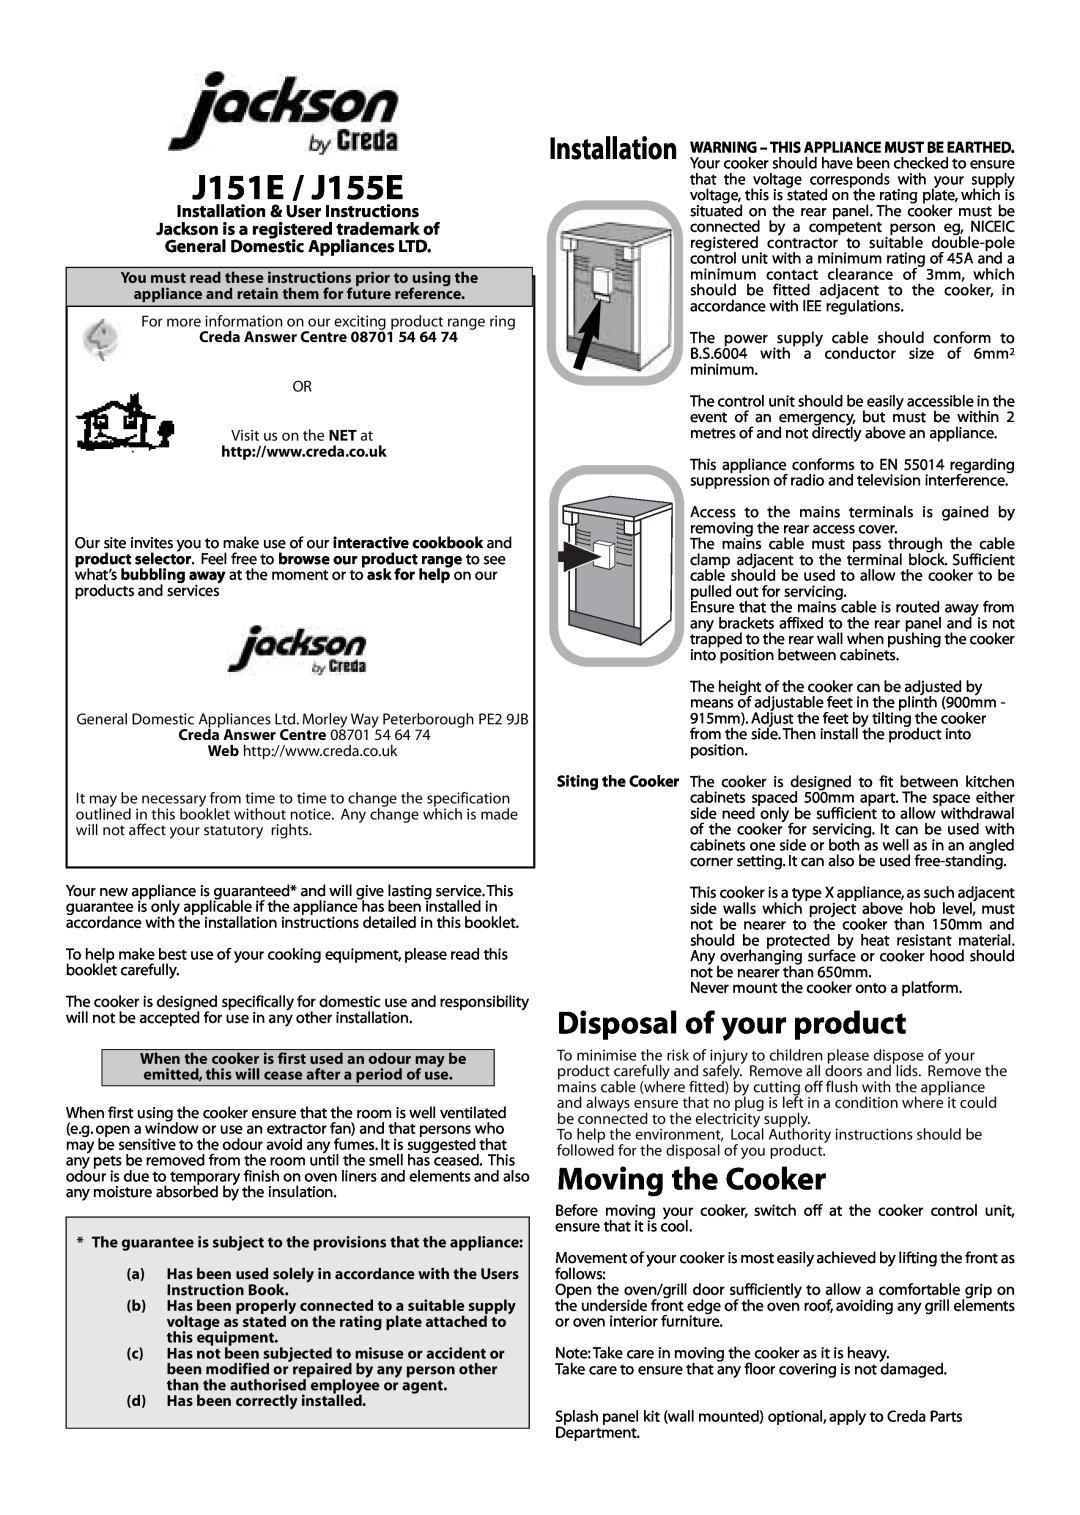 Creda J151E installation instructions Disposal of your product, Moving the Cooker, Installation & User Instructions 